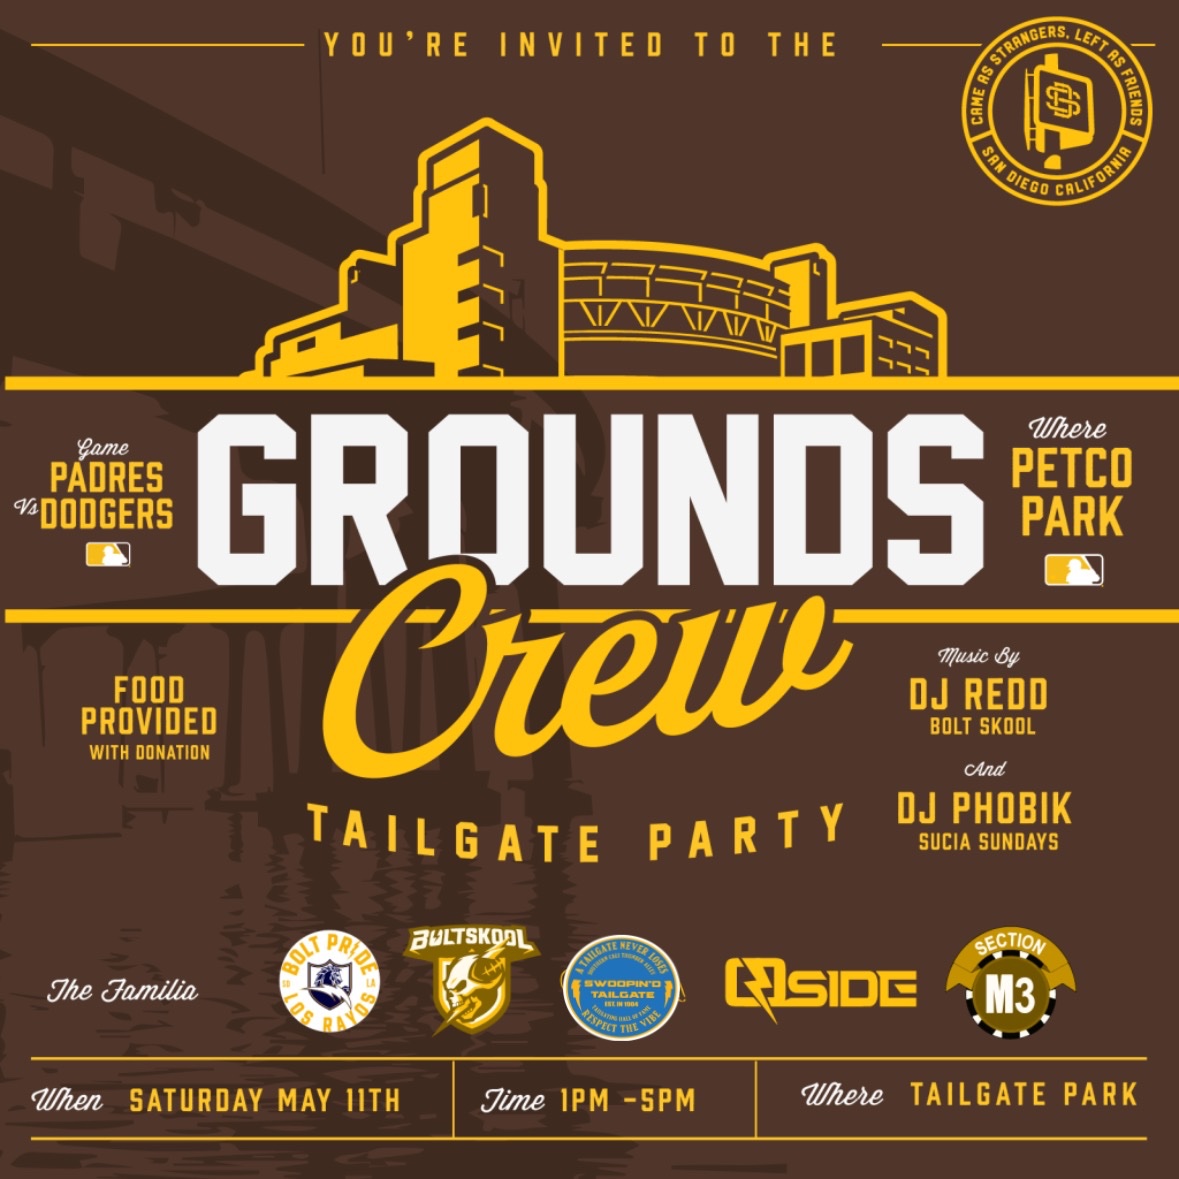 This Sat May 11th join #TheGroundsCrew for a #ThunderAlley Tailgate ⚾️
#Padres vs #Dodgers 
At Tailgate Park.
Dj & a Norteño Band🎶⚡️

#BoltPride 
#BoltSkool
#SwoopinD
#M3春 
#Osiders 
#FriarFaithful
#FanUnity